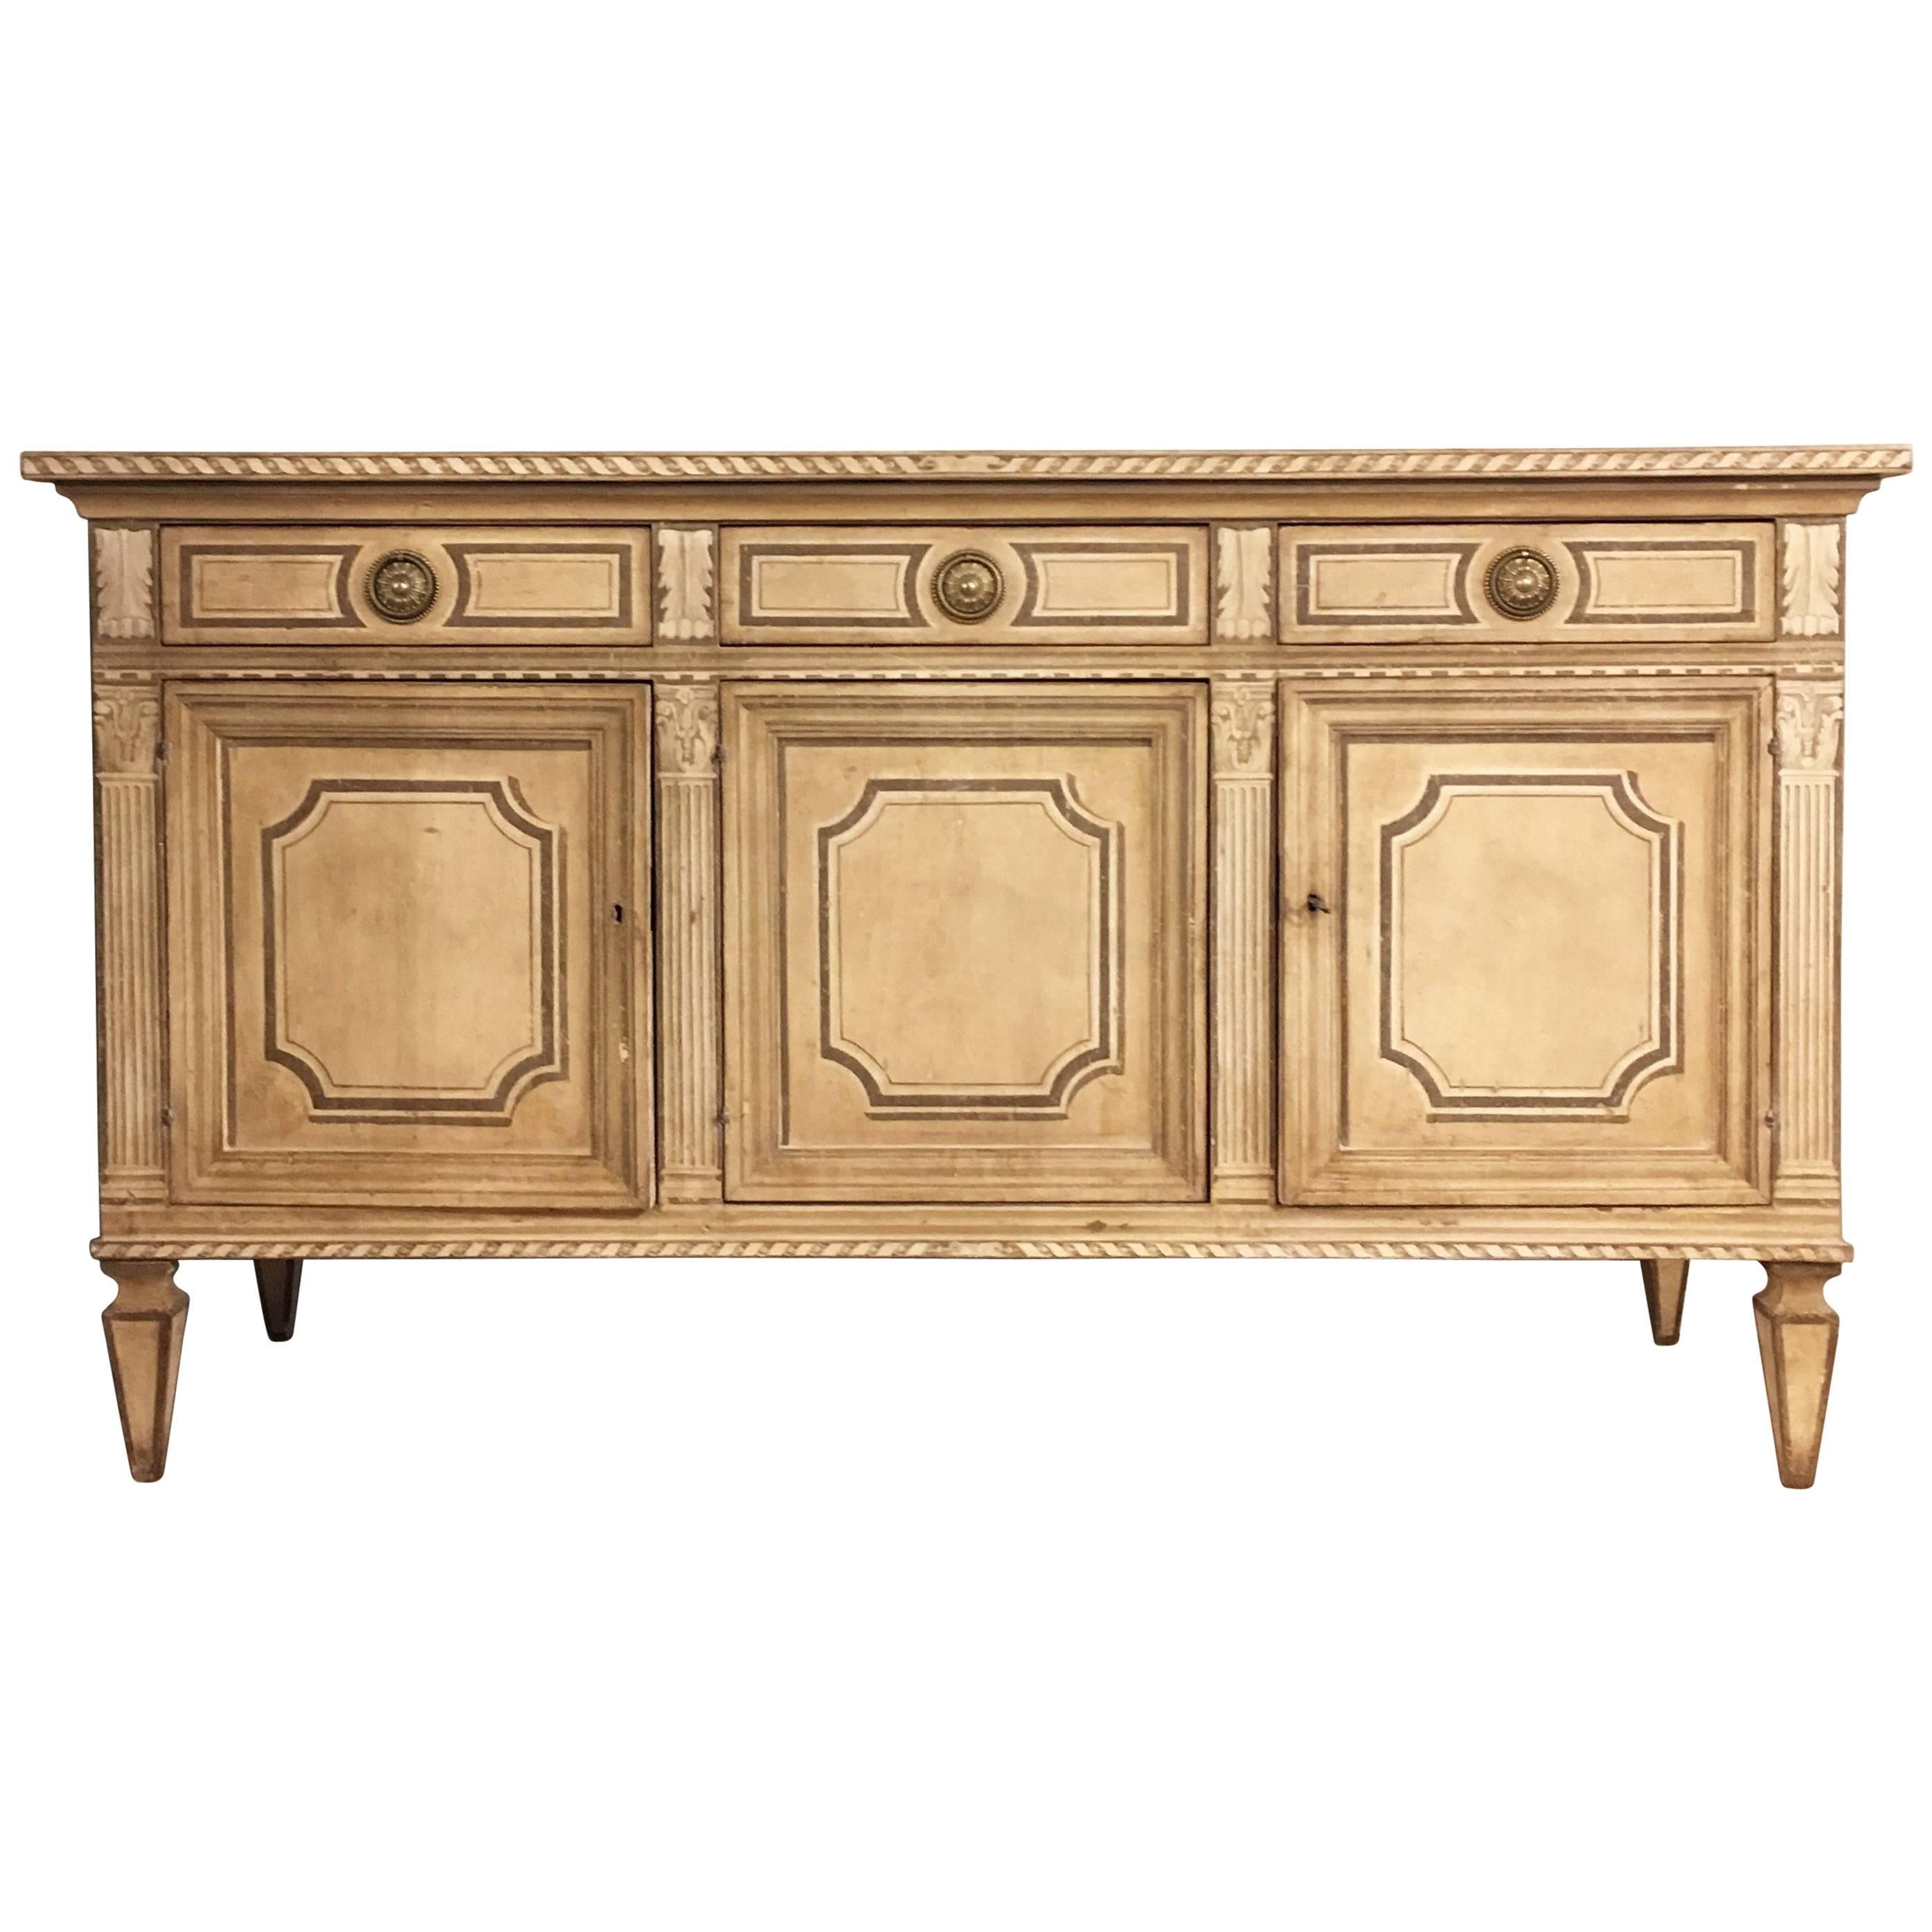 Late 18th Century Neoclassical Italian Credenza in Painted Poplar Wood For Sale